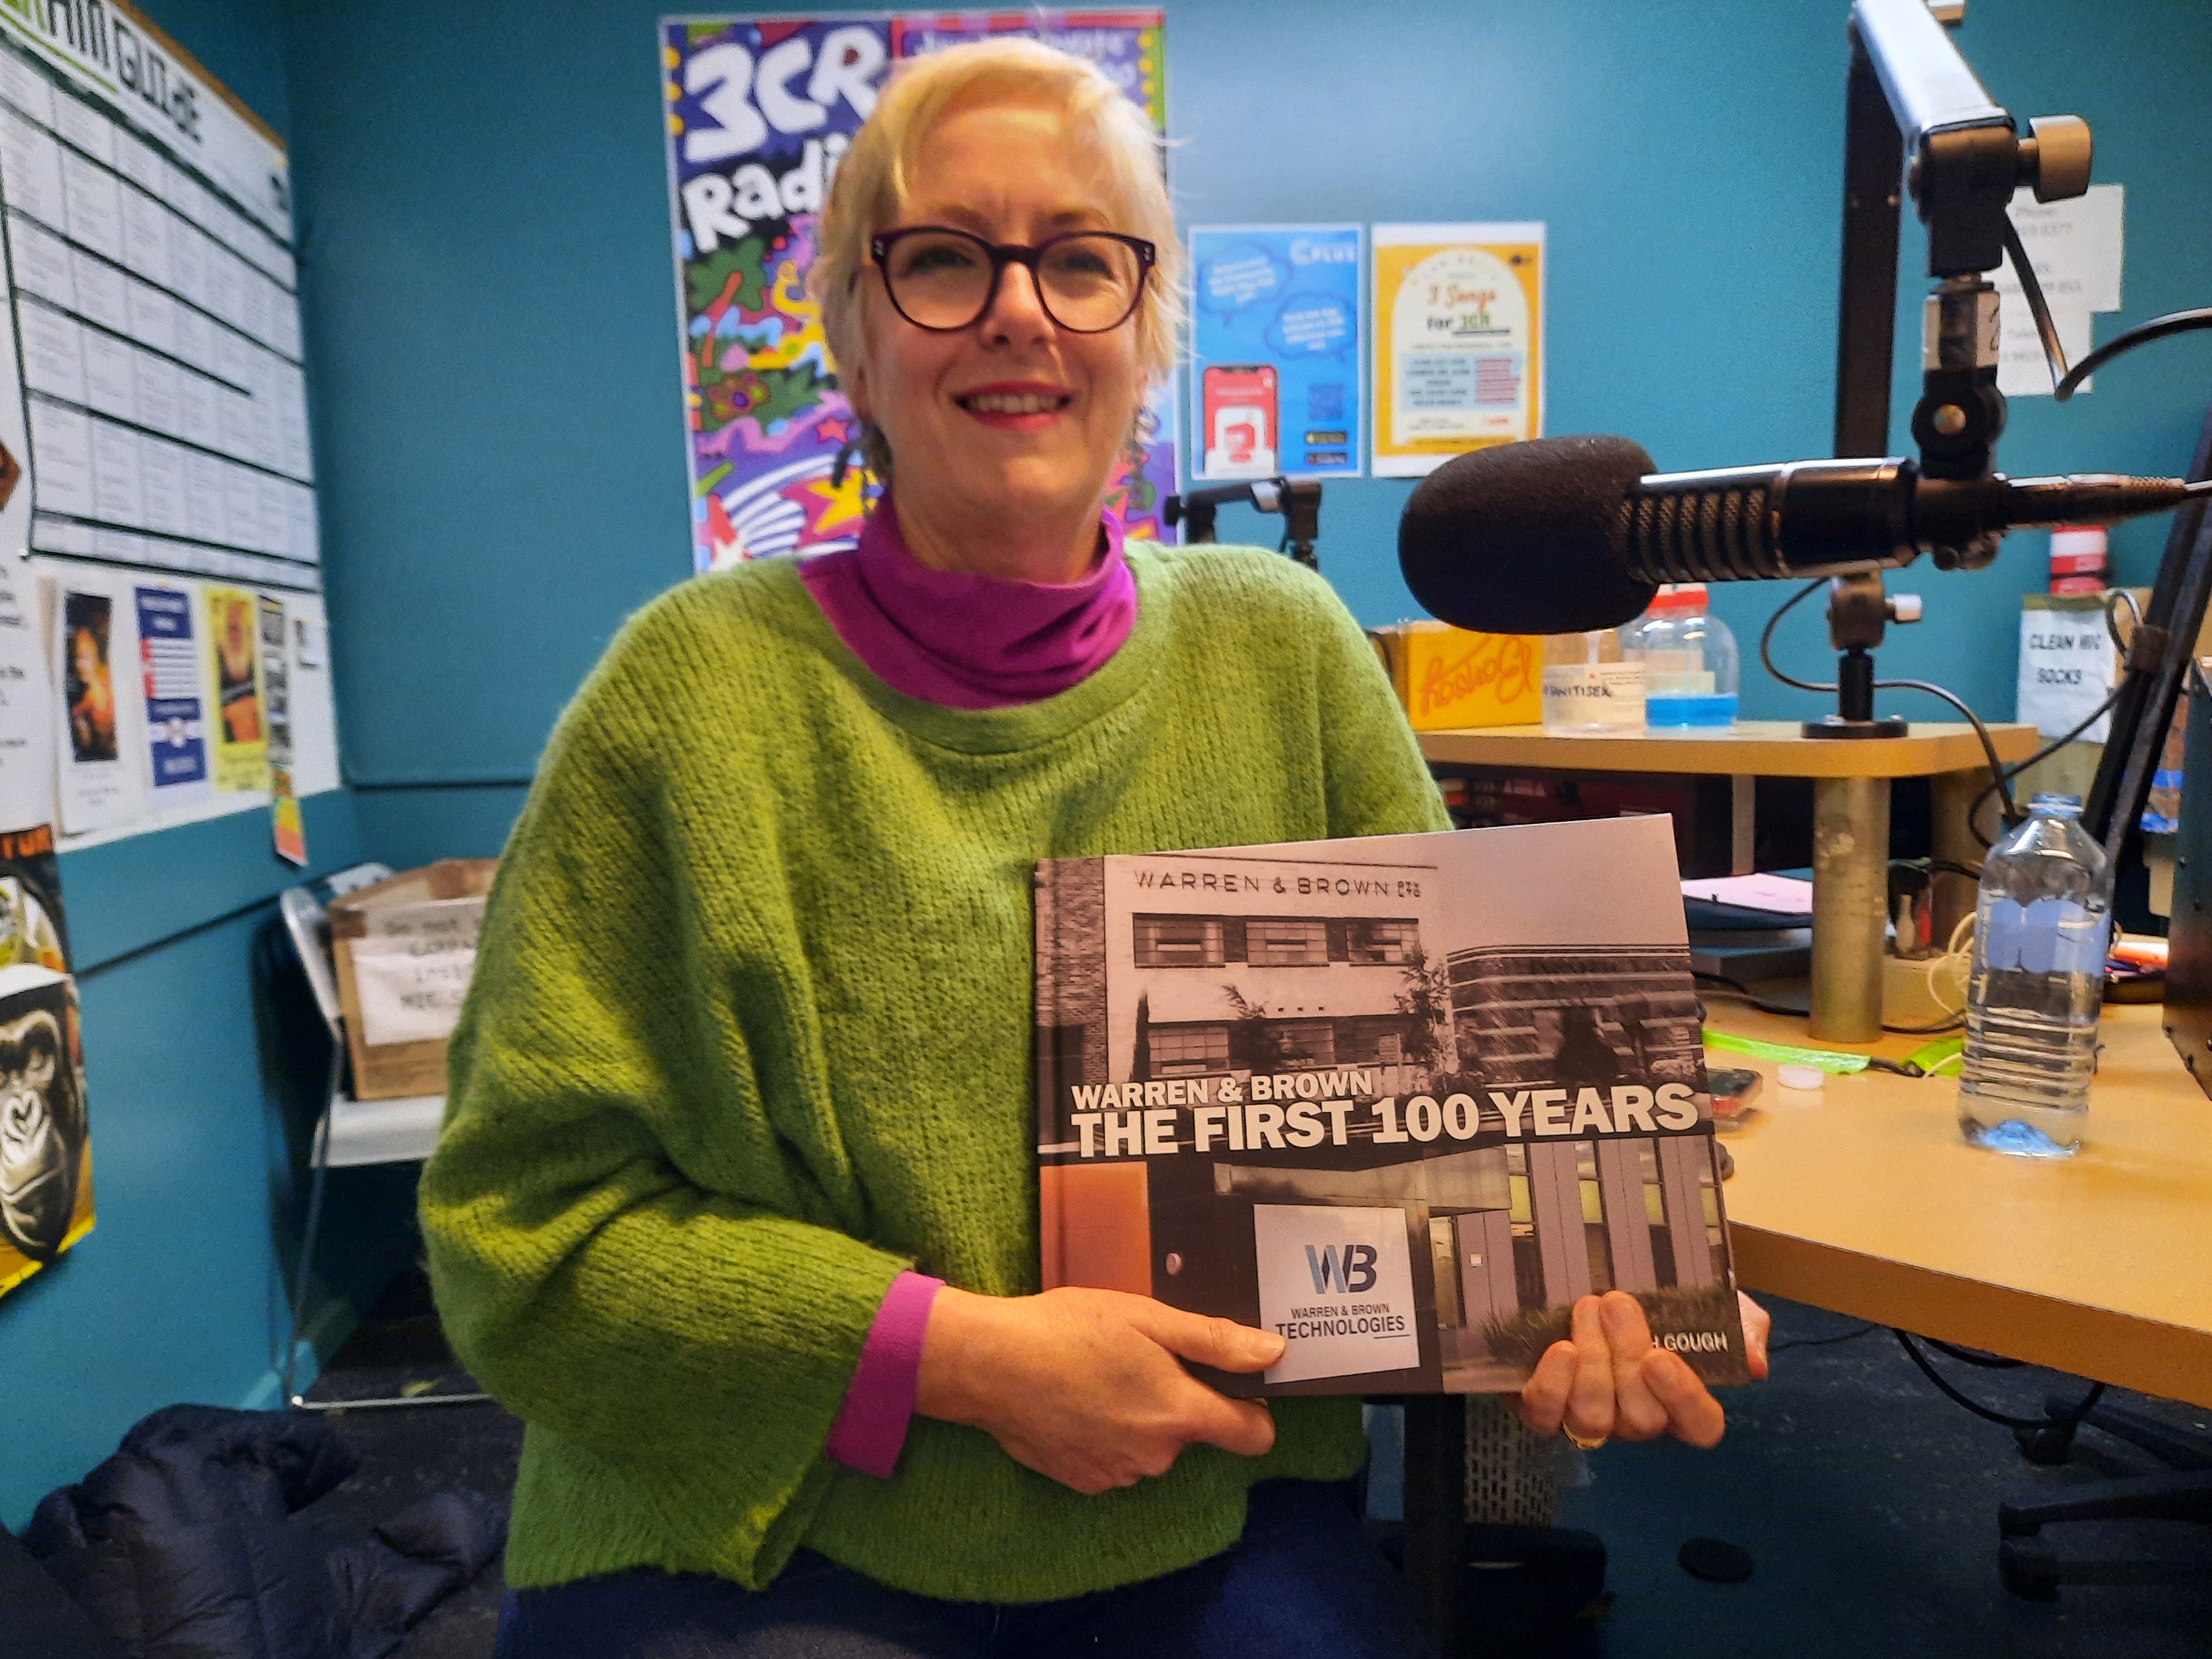 Deborah sits in studio 1 at 3CR holding her book and smiling at the viewer. She wears a green and pink jumper and sports black glasses